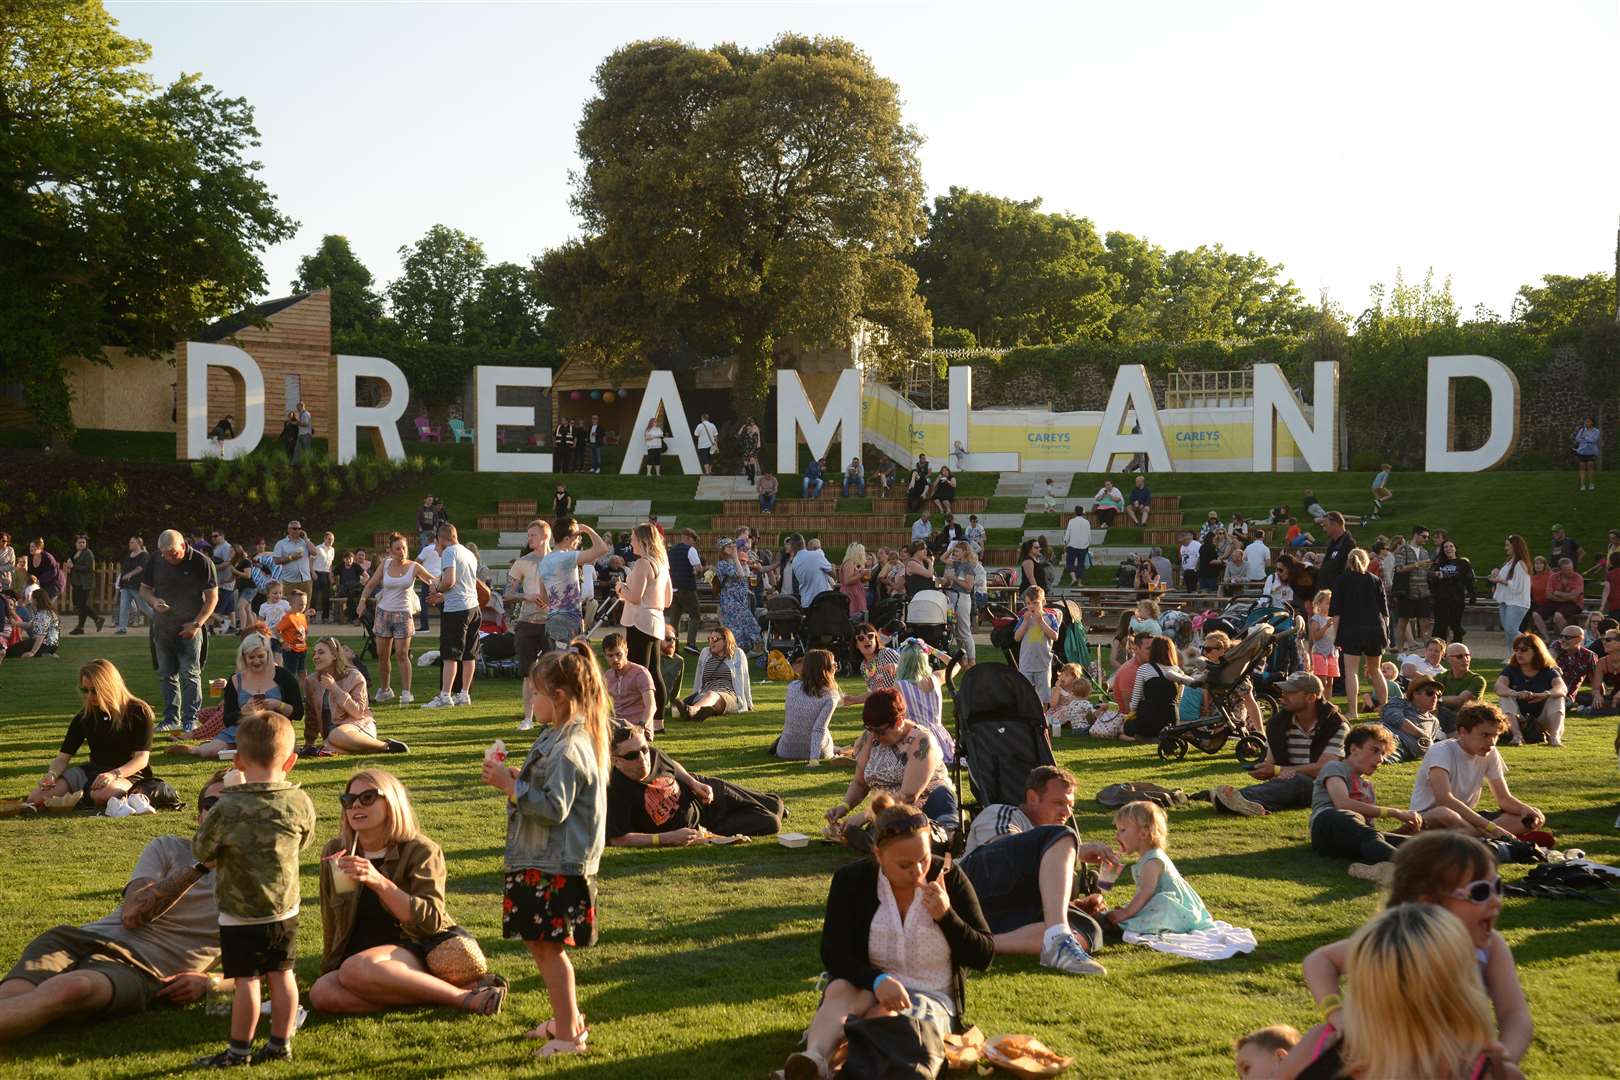 Summer events have helped secure Dreamland's future